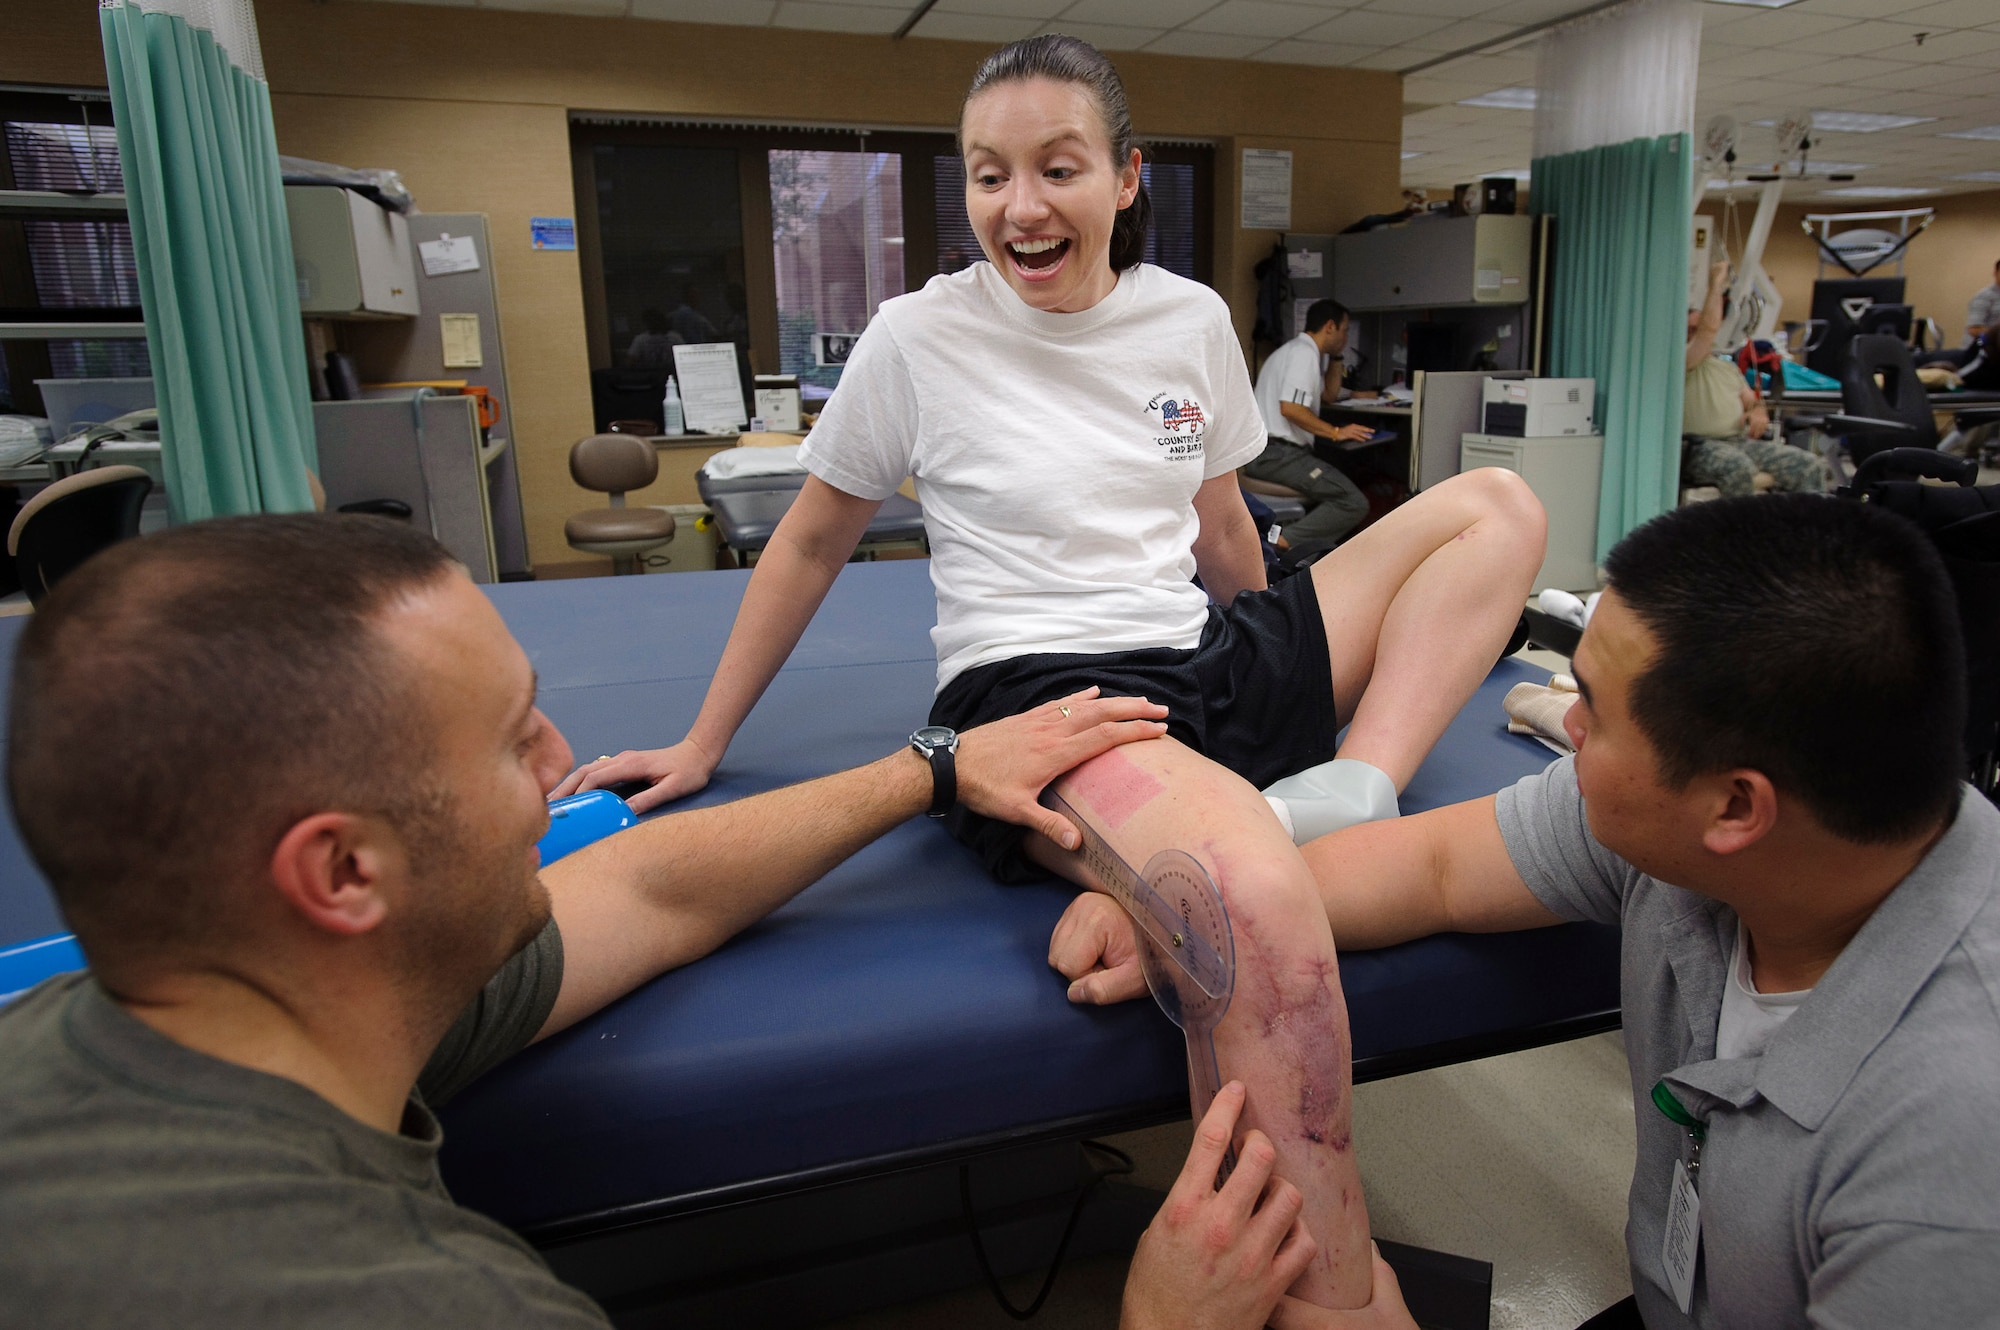 Capt. Wendy Kosek, 19th Airlift Wing legal officer from Little Rock Air Force Base, Ark., reacts to her latest range of motion test conducted by John Inzinna, left, and Anhtuan Pham, during physical therapy Brooke Army Medical Center. When she started physical therapy Kosek had just 30 degrees of mobility in her knee. She is currently up to 63 degrees and her goal is a 10 degree increase per week. (U.S. Air Force photo/Steve Thurow)